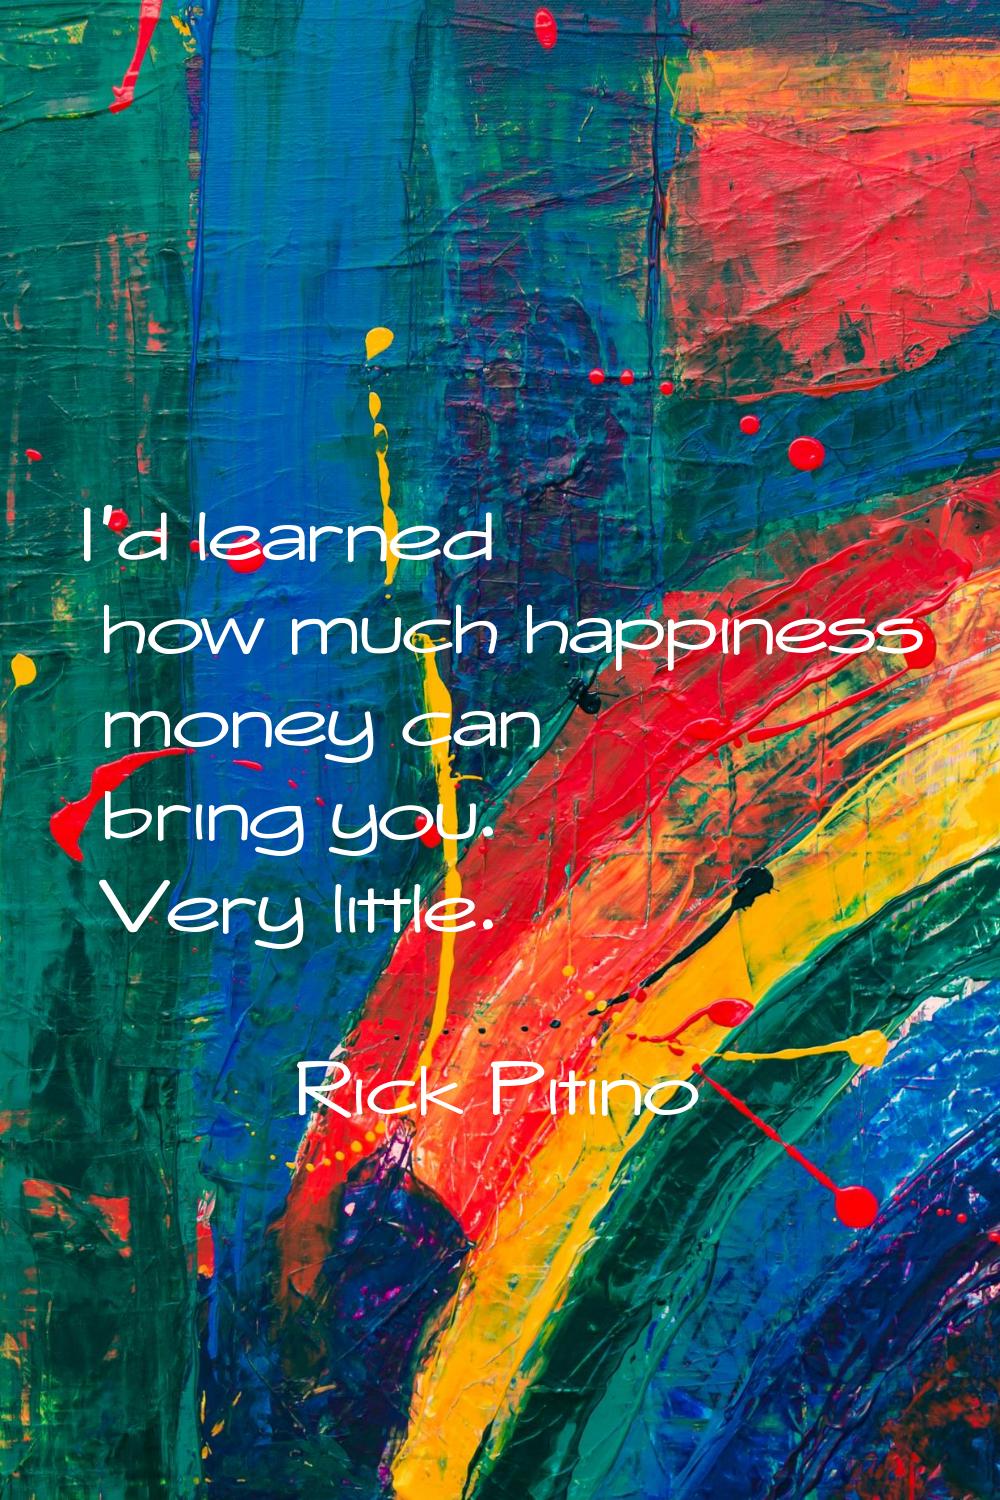 I'd learned how much happiness money can bring you. Very little.